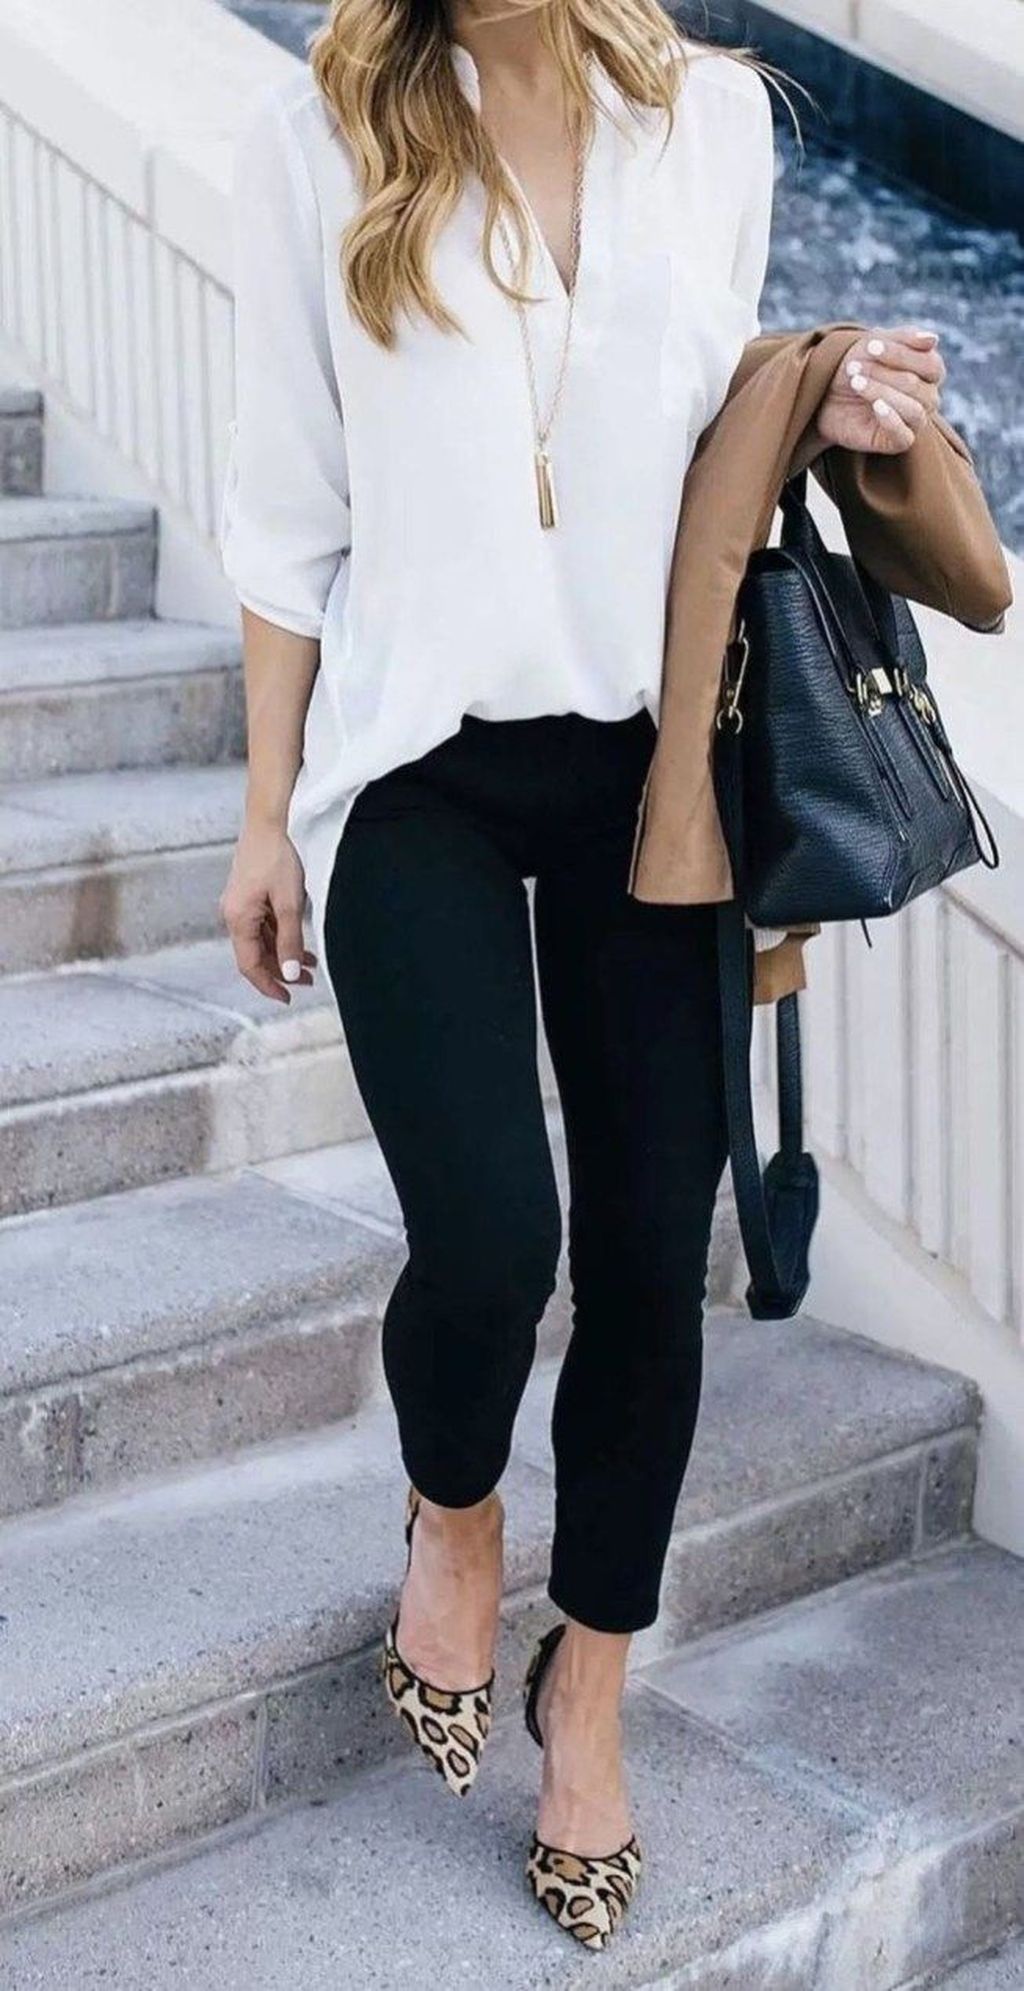 47 Stylish Work Outfits Ideas With Flats -   14 dress For Work with flats ideas